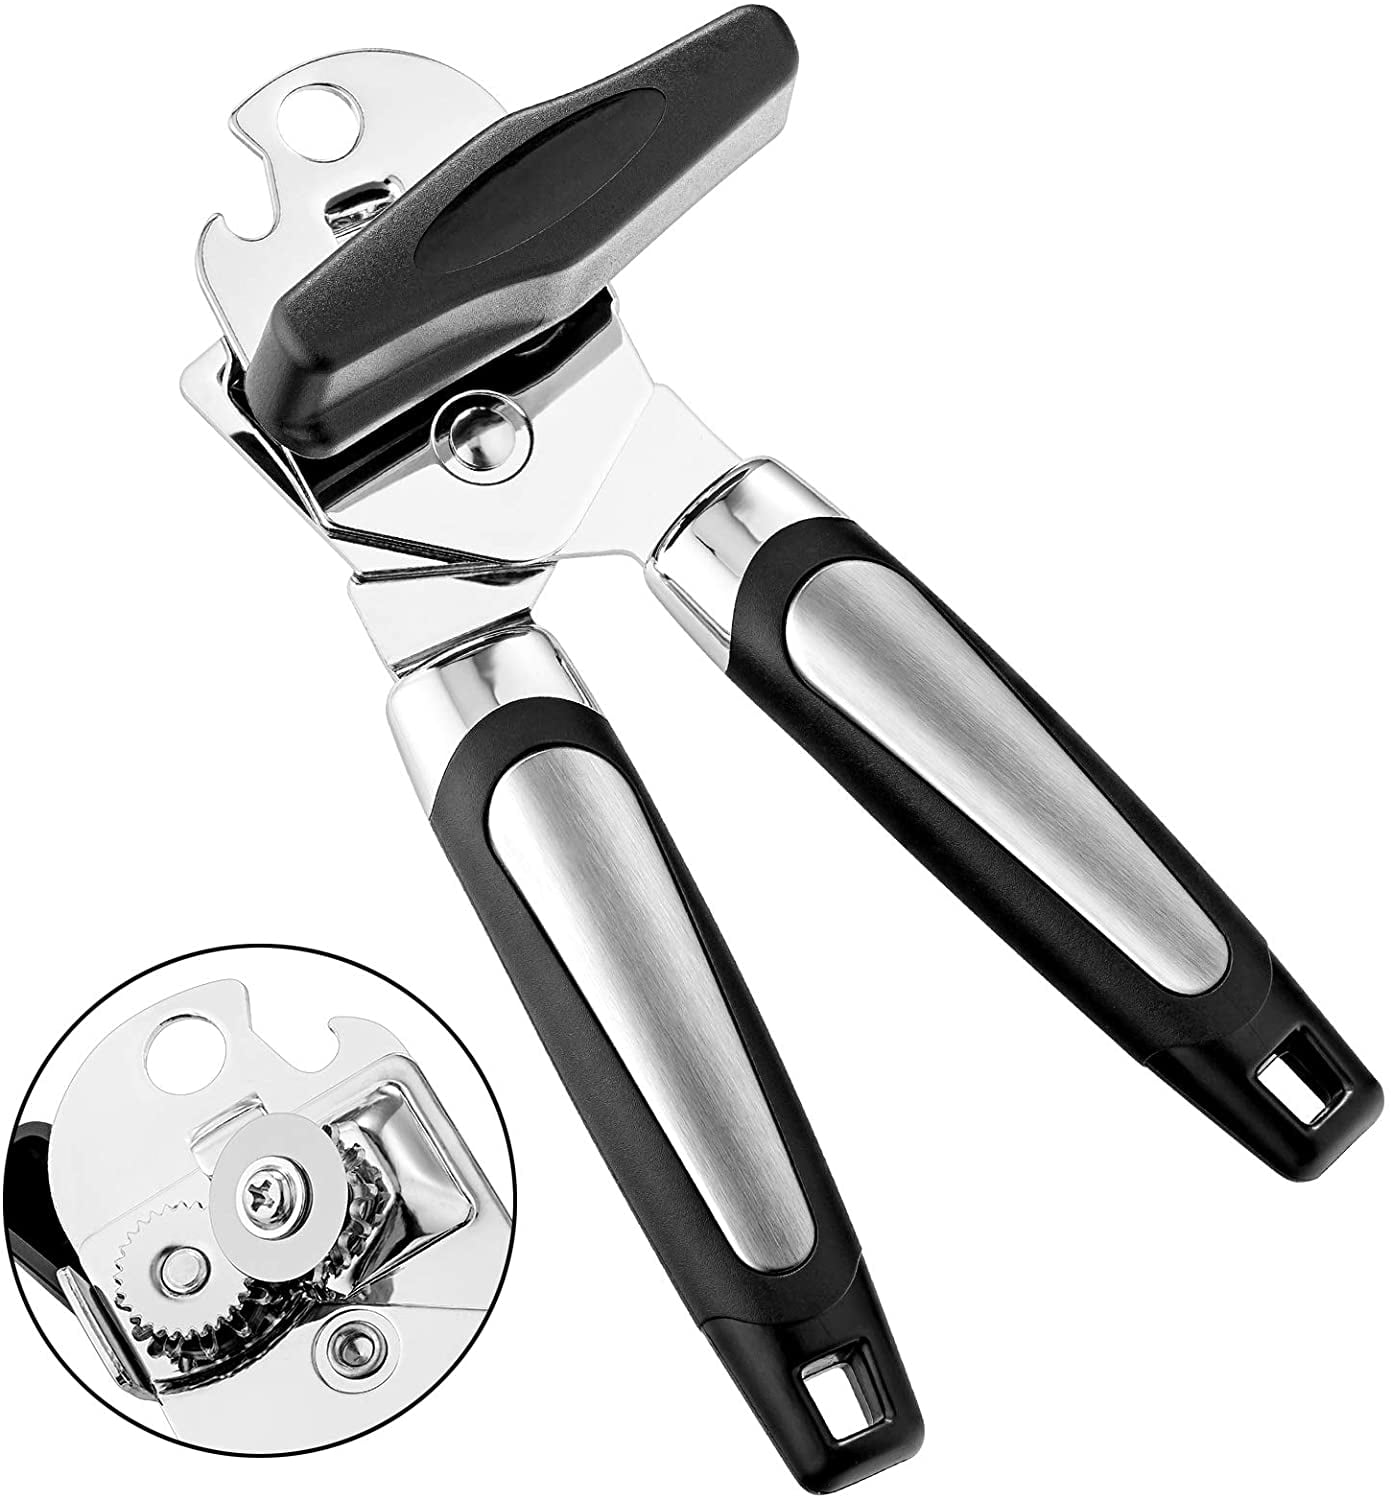 Comfortable Handles Easy To Turn Knob Lid Lifter Restaurant For Kitchen Bottle Opener Stainless Steel Can Opener Camping Sharp Cutting Disc Manual Silver and Black Long 